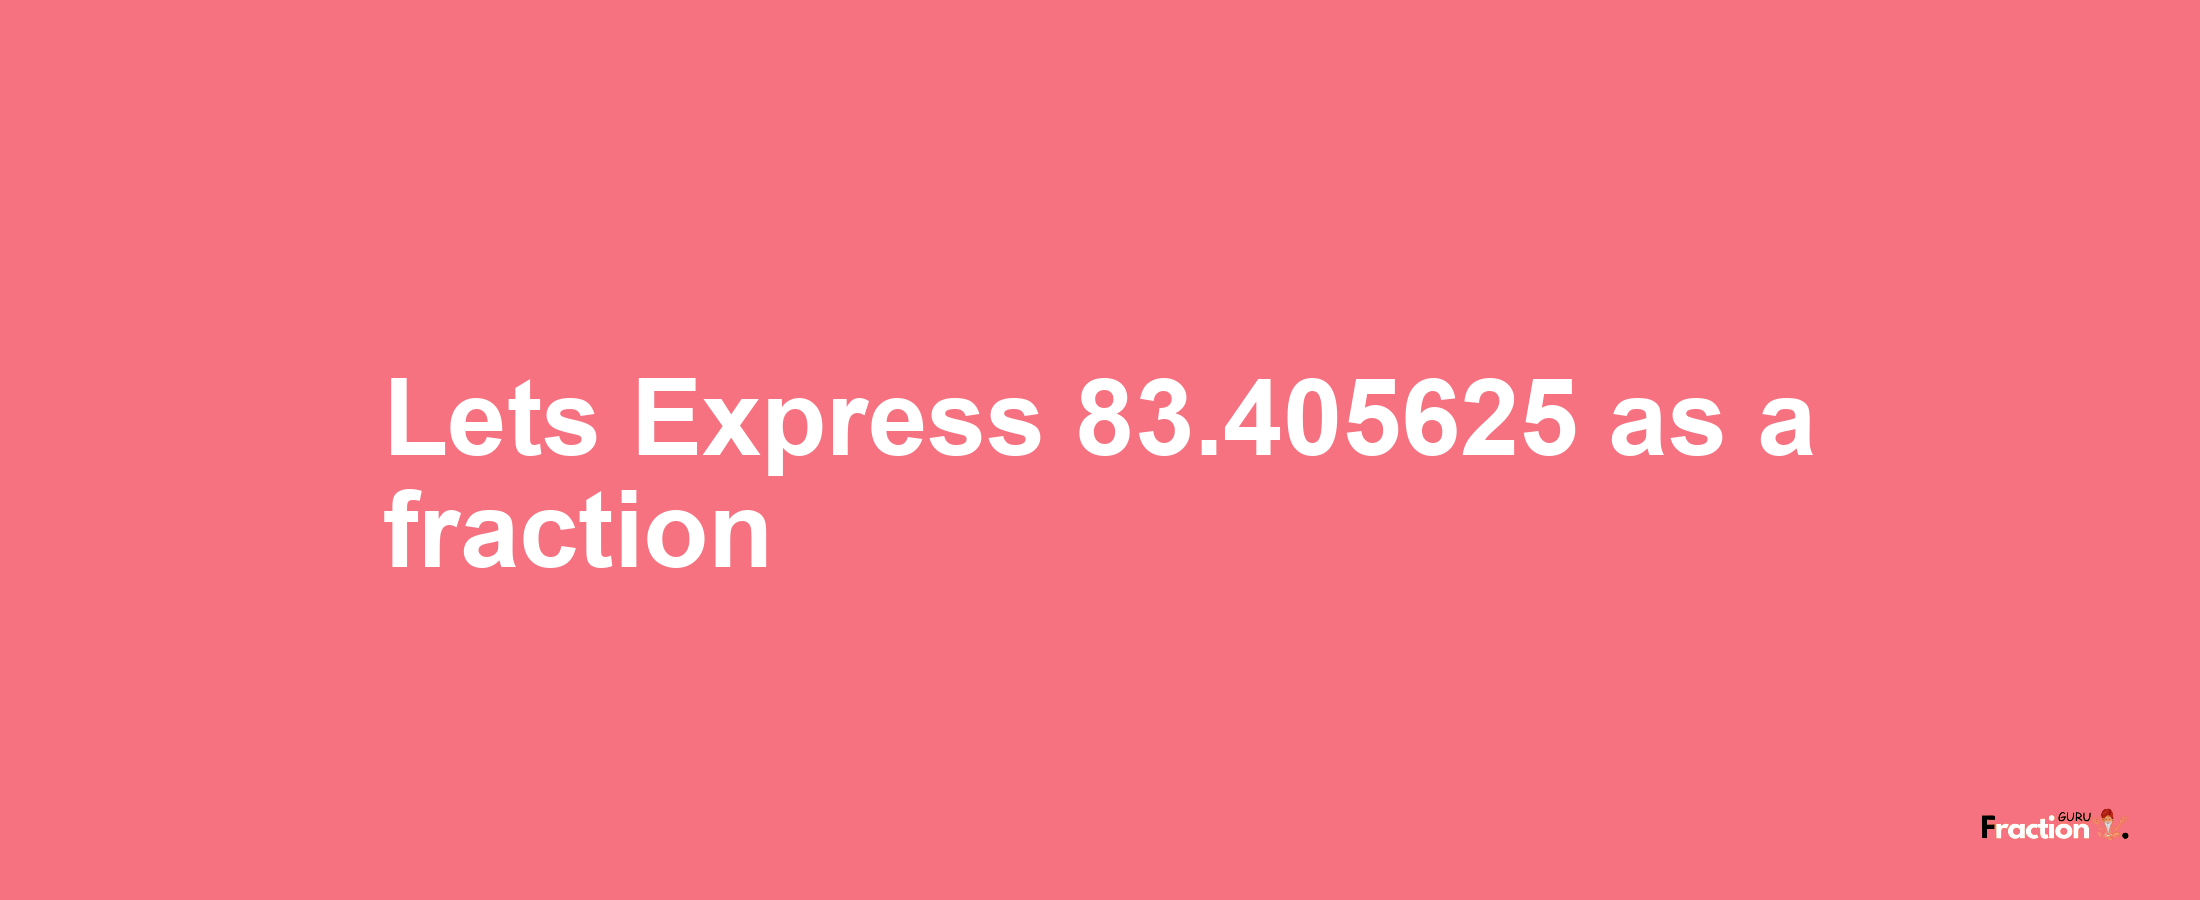 Lets Express 83.405625 as afraction